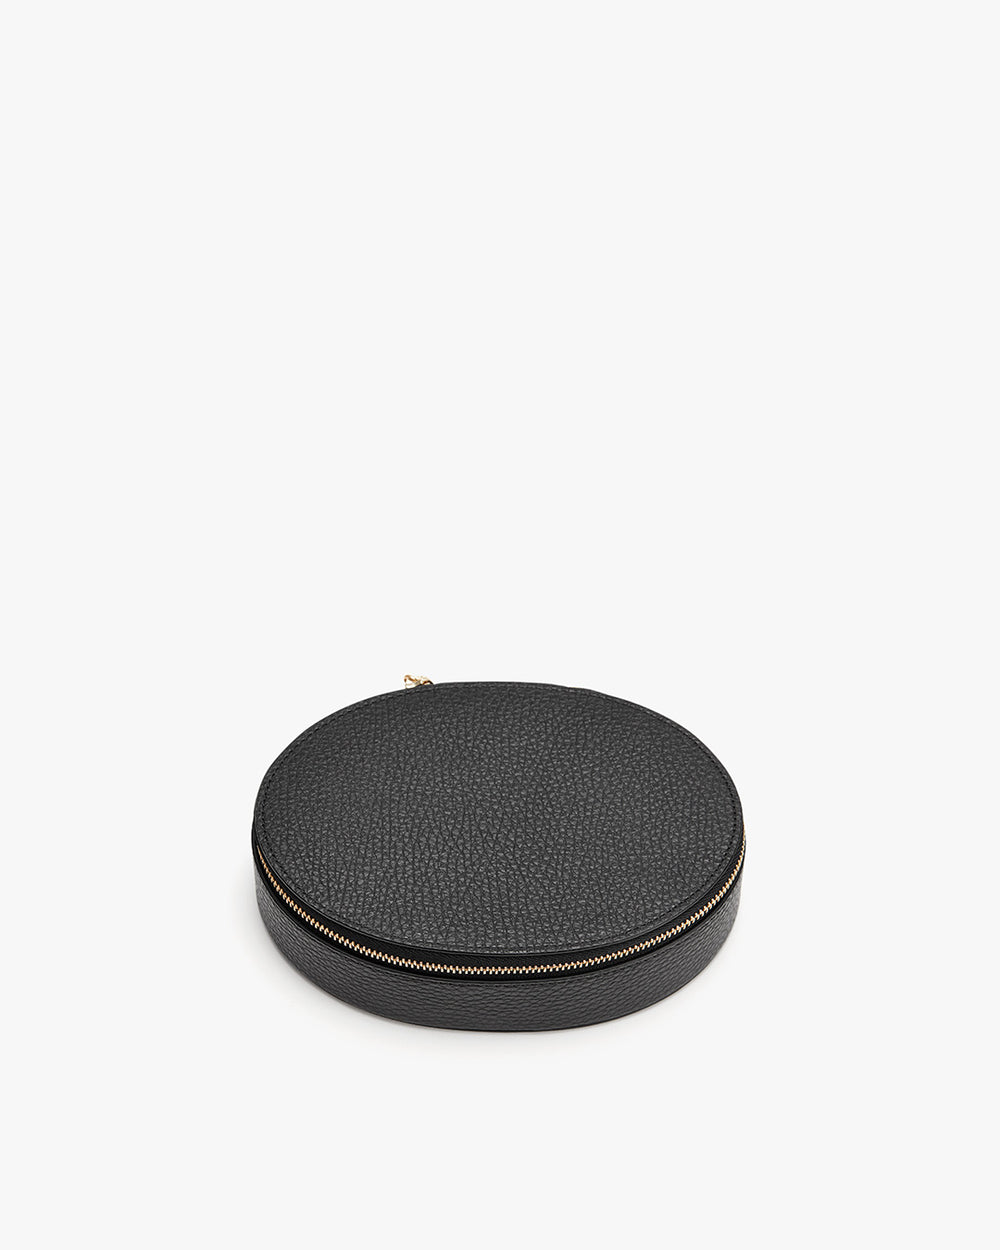 Round zippered case on a solid background